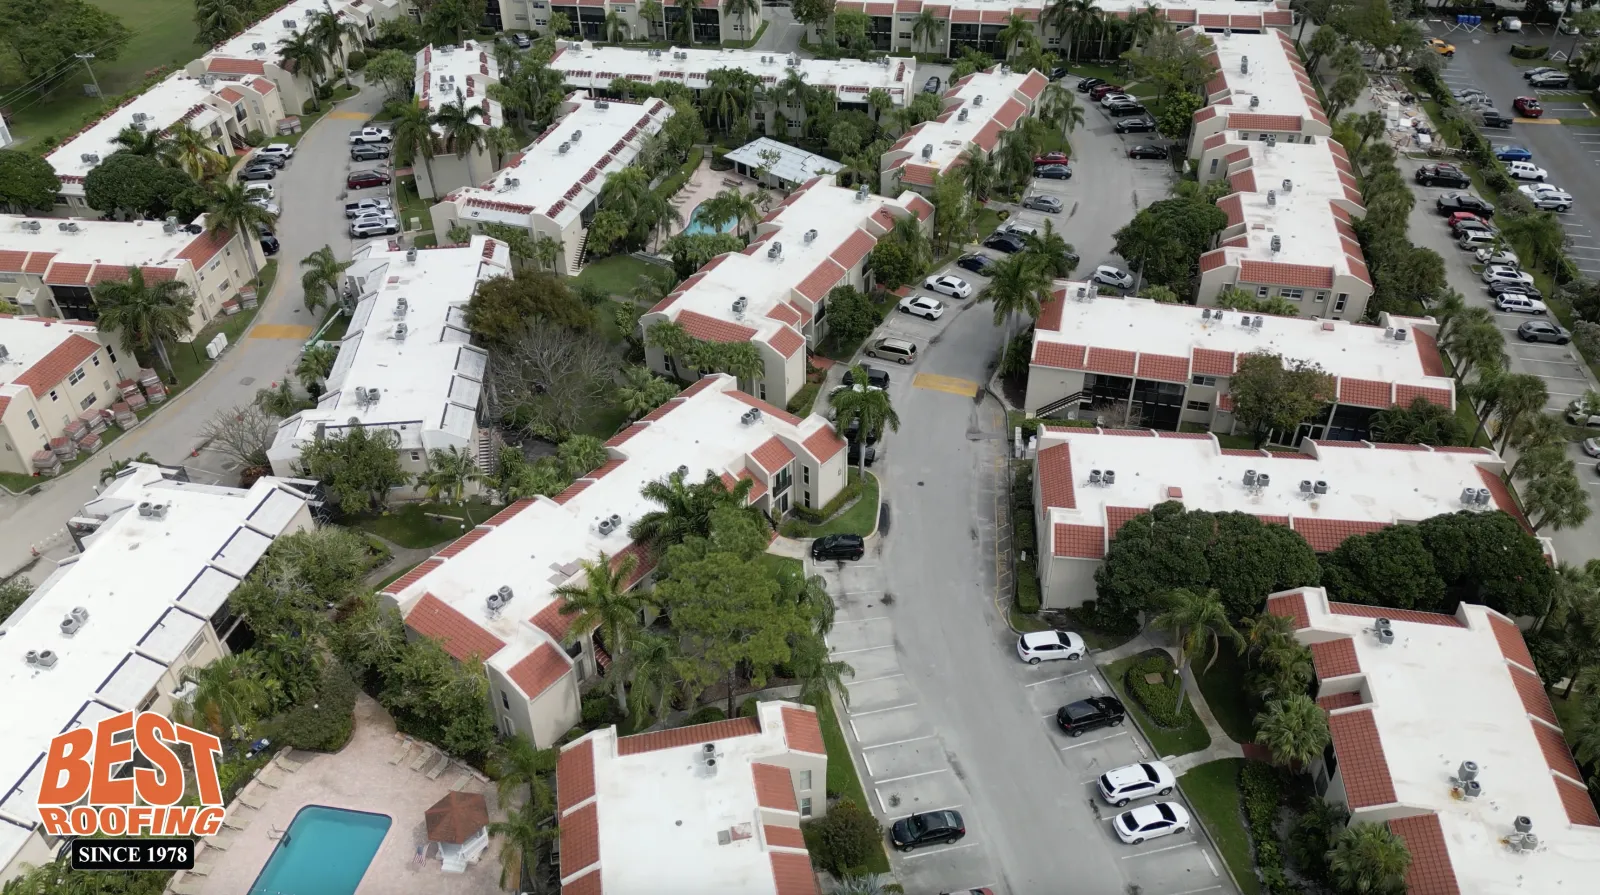 Flat Roofing on Condominiums